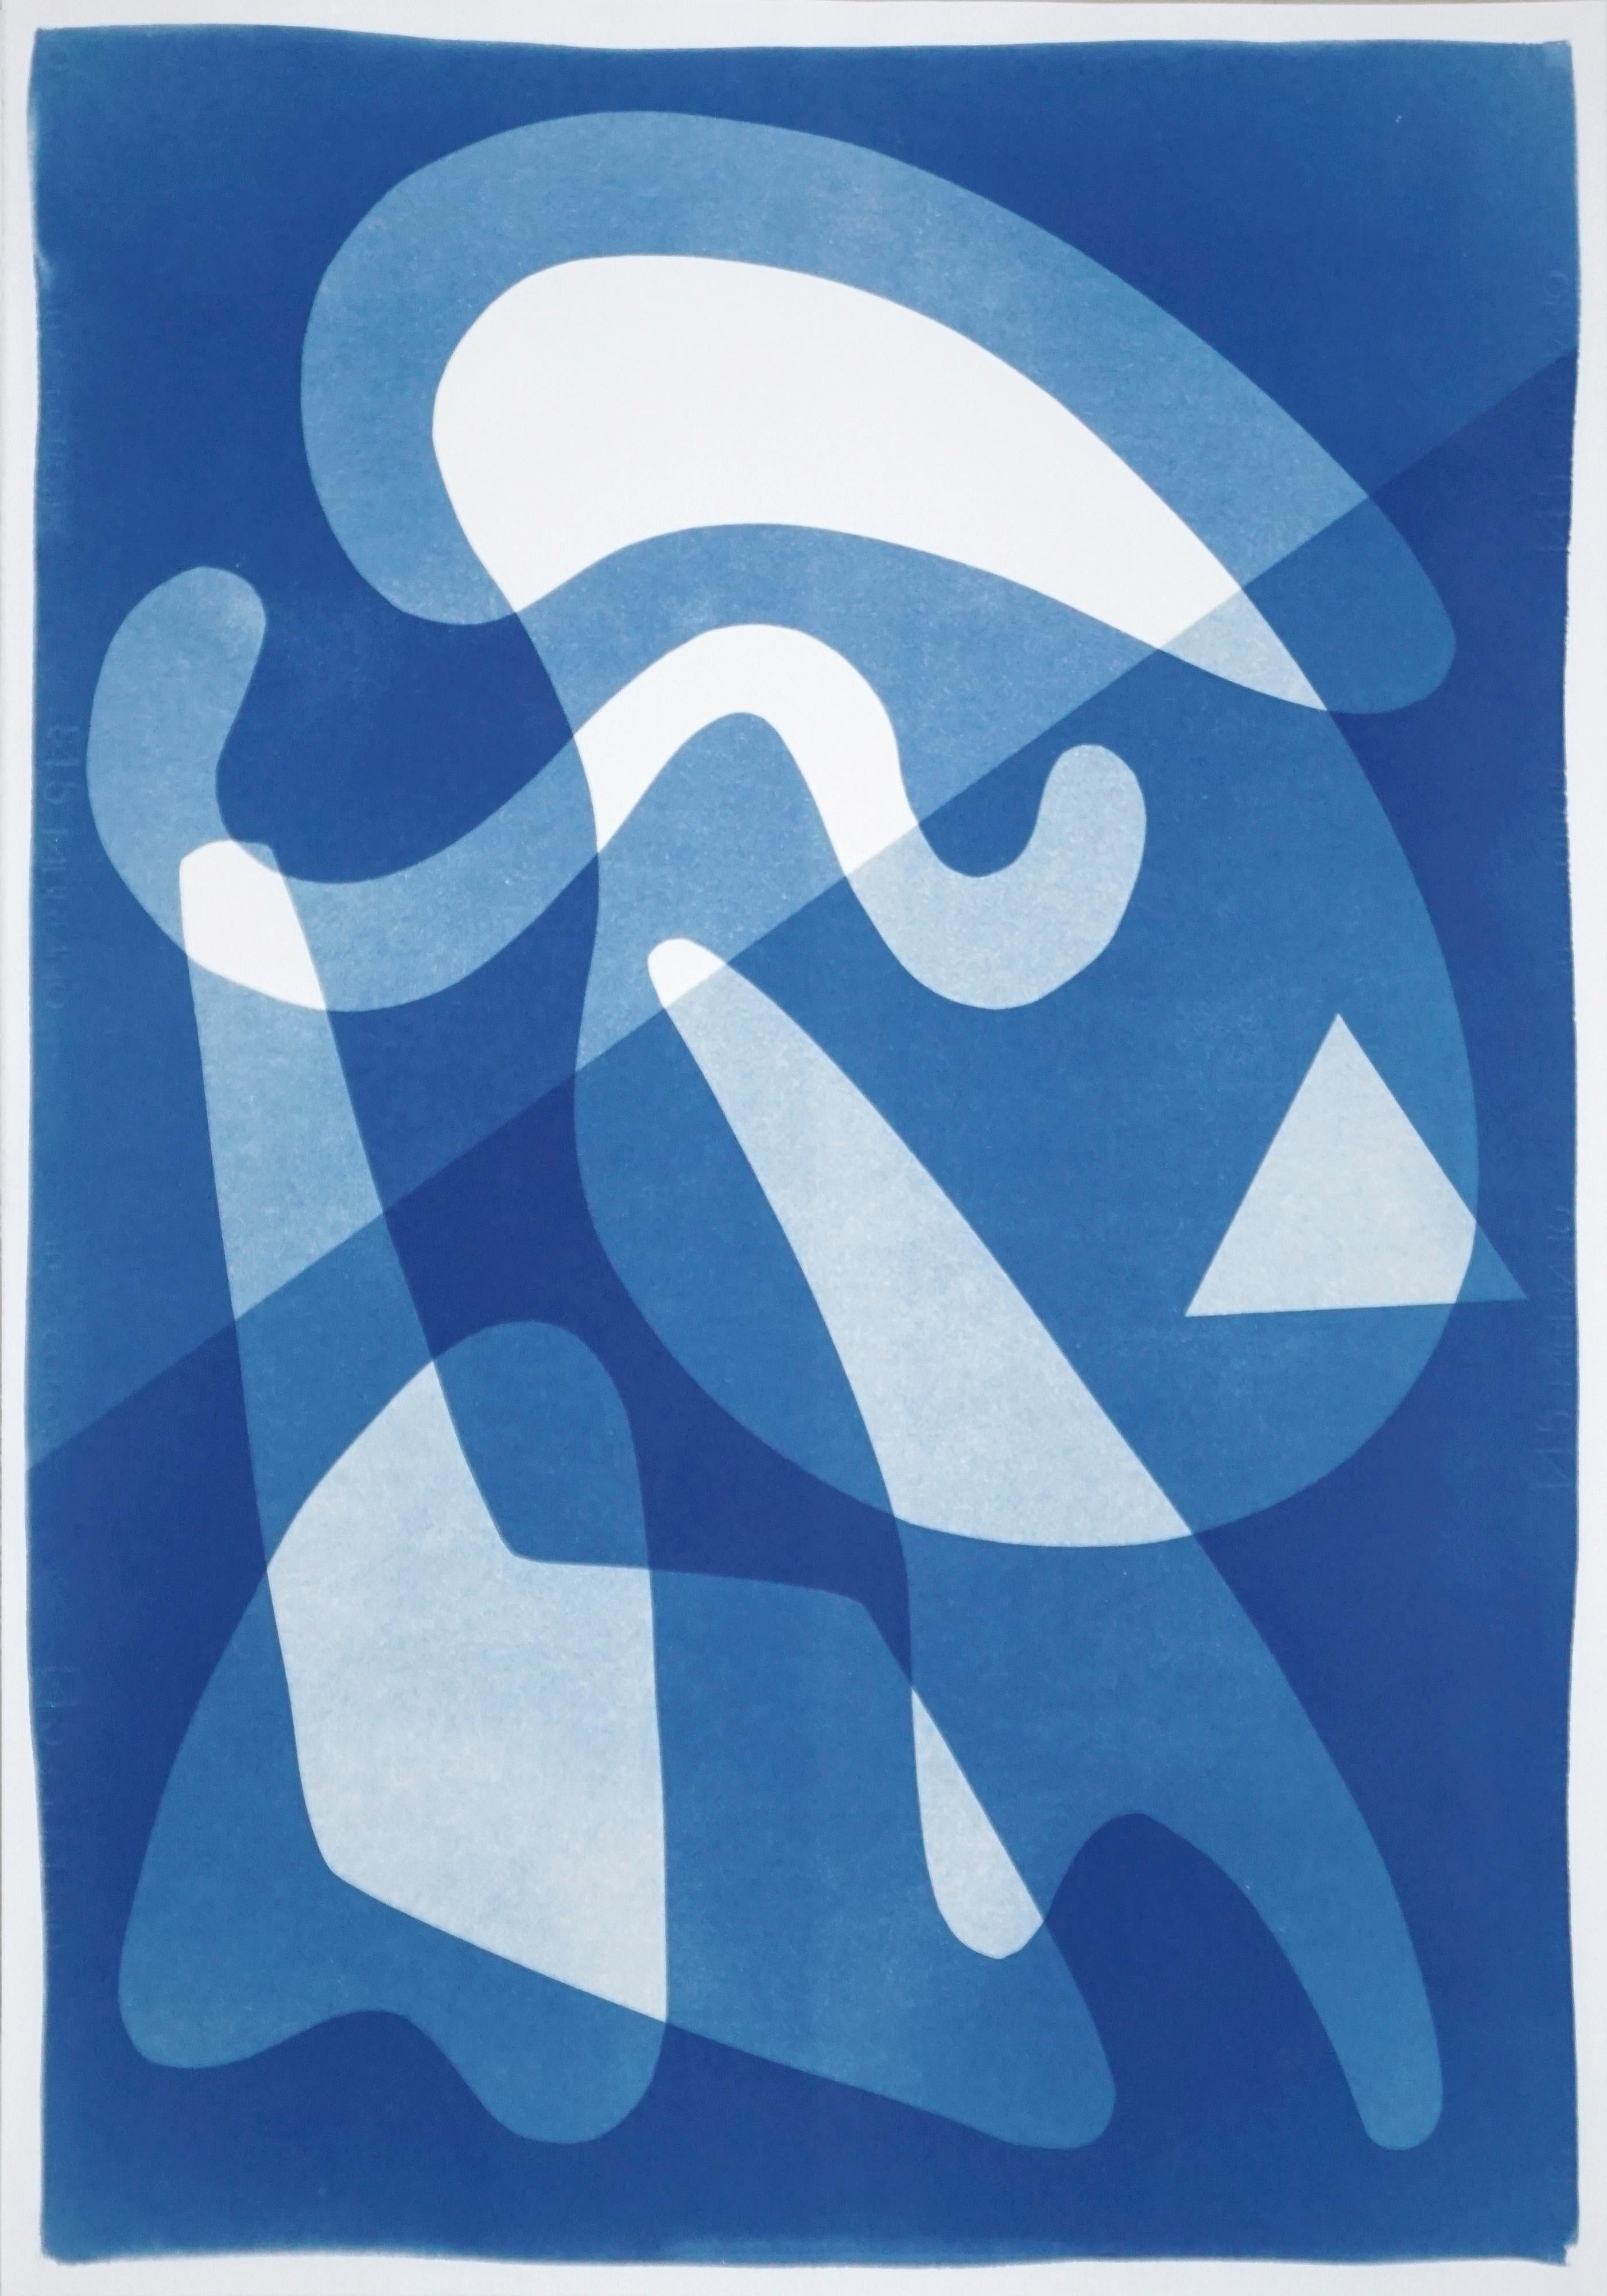 Retro Futuristic Shapes in Blue Tones, Extra Large Cyanotype Monotype, Smooth 